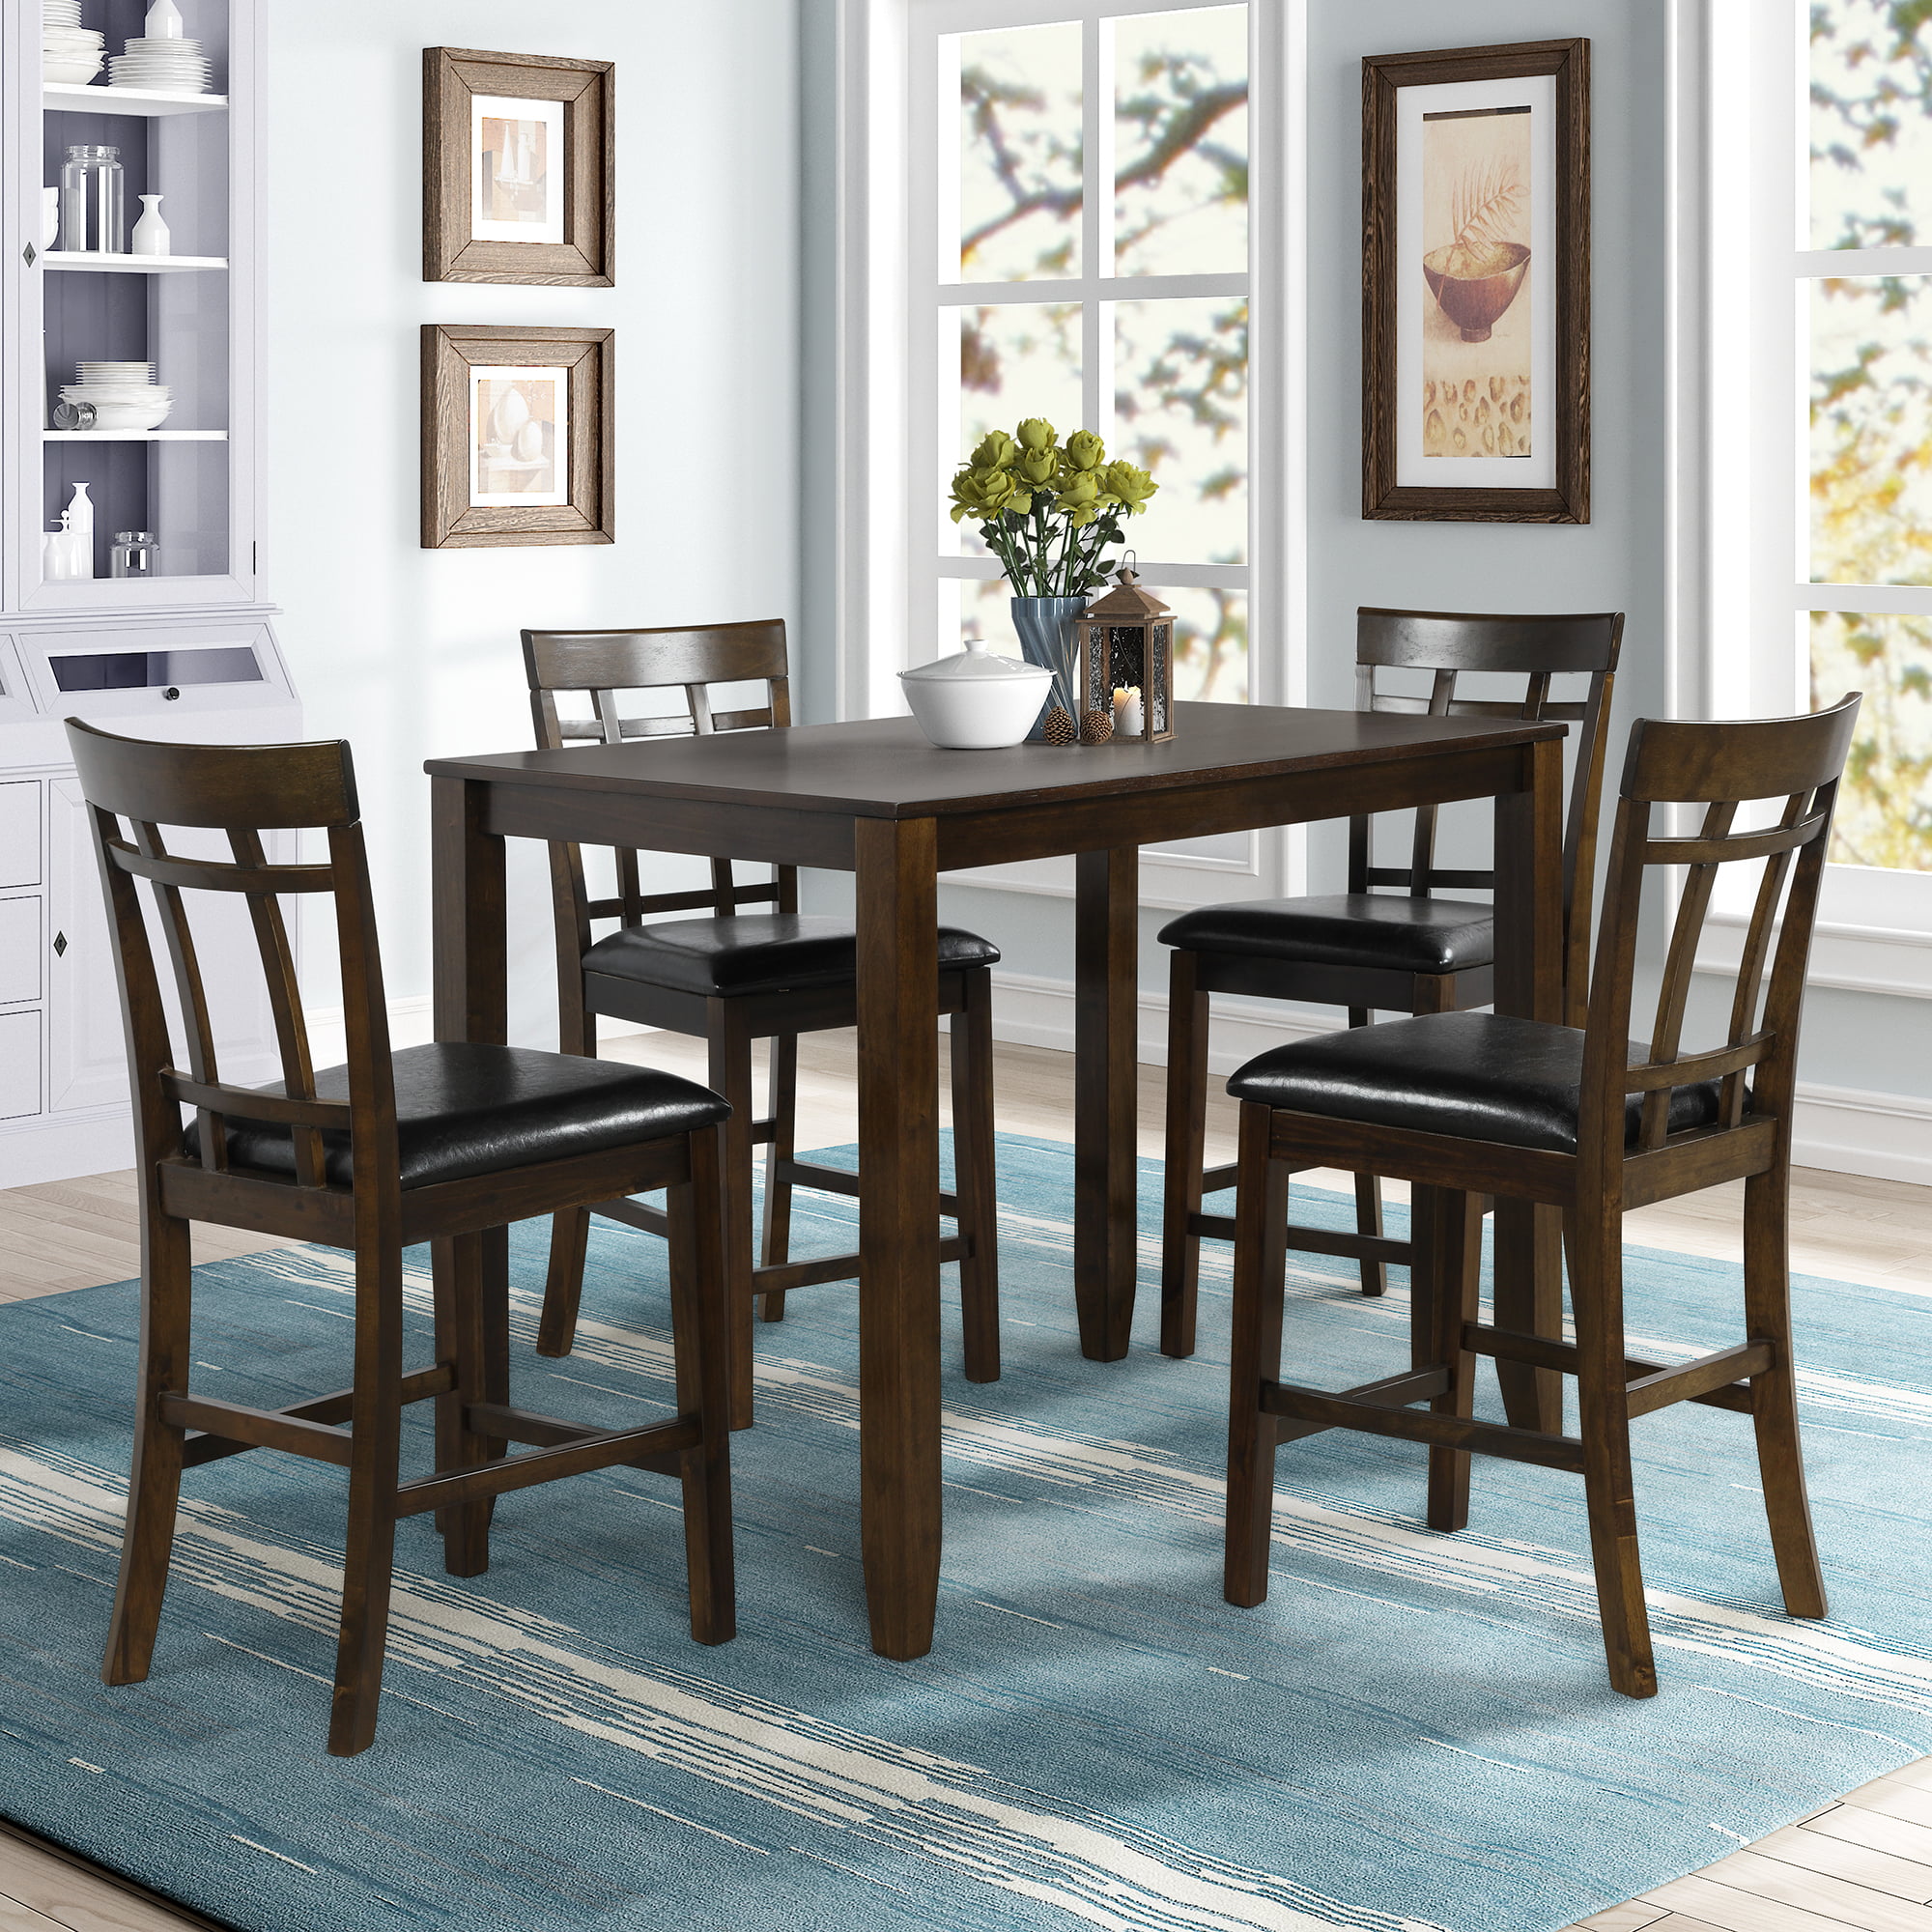 Clearance! 5-Piece Counter Height Dining Set, Wooden Dining Table Sets ...